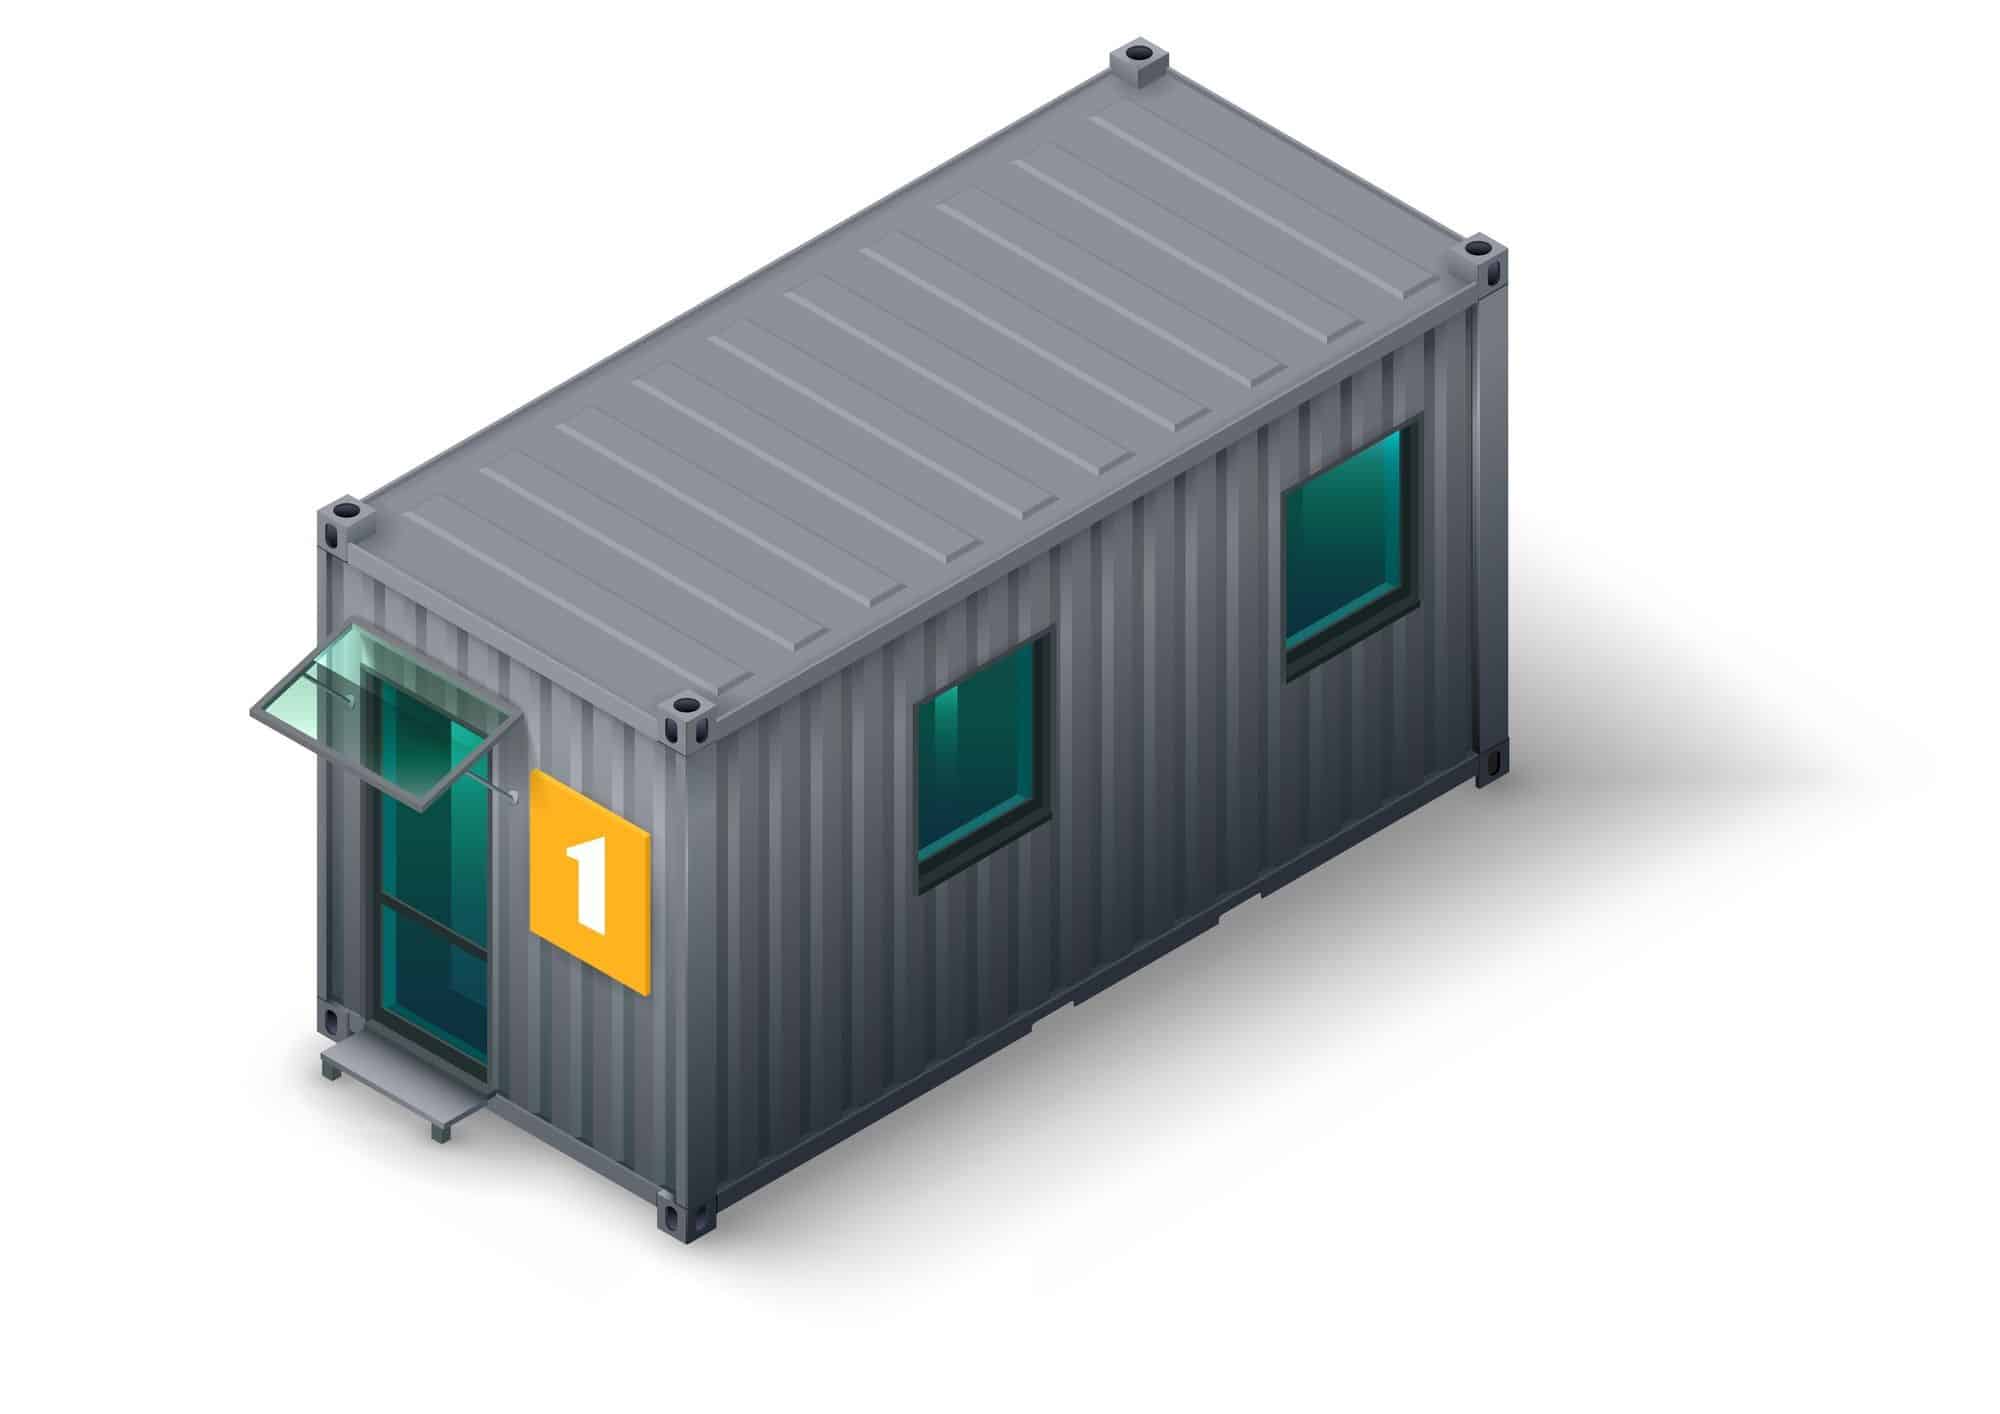 Here's How Storage Containers for Sale Can Make Remote Work Easier